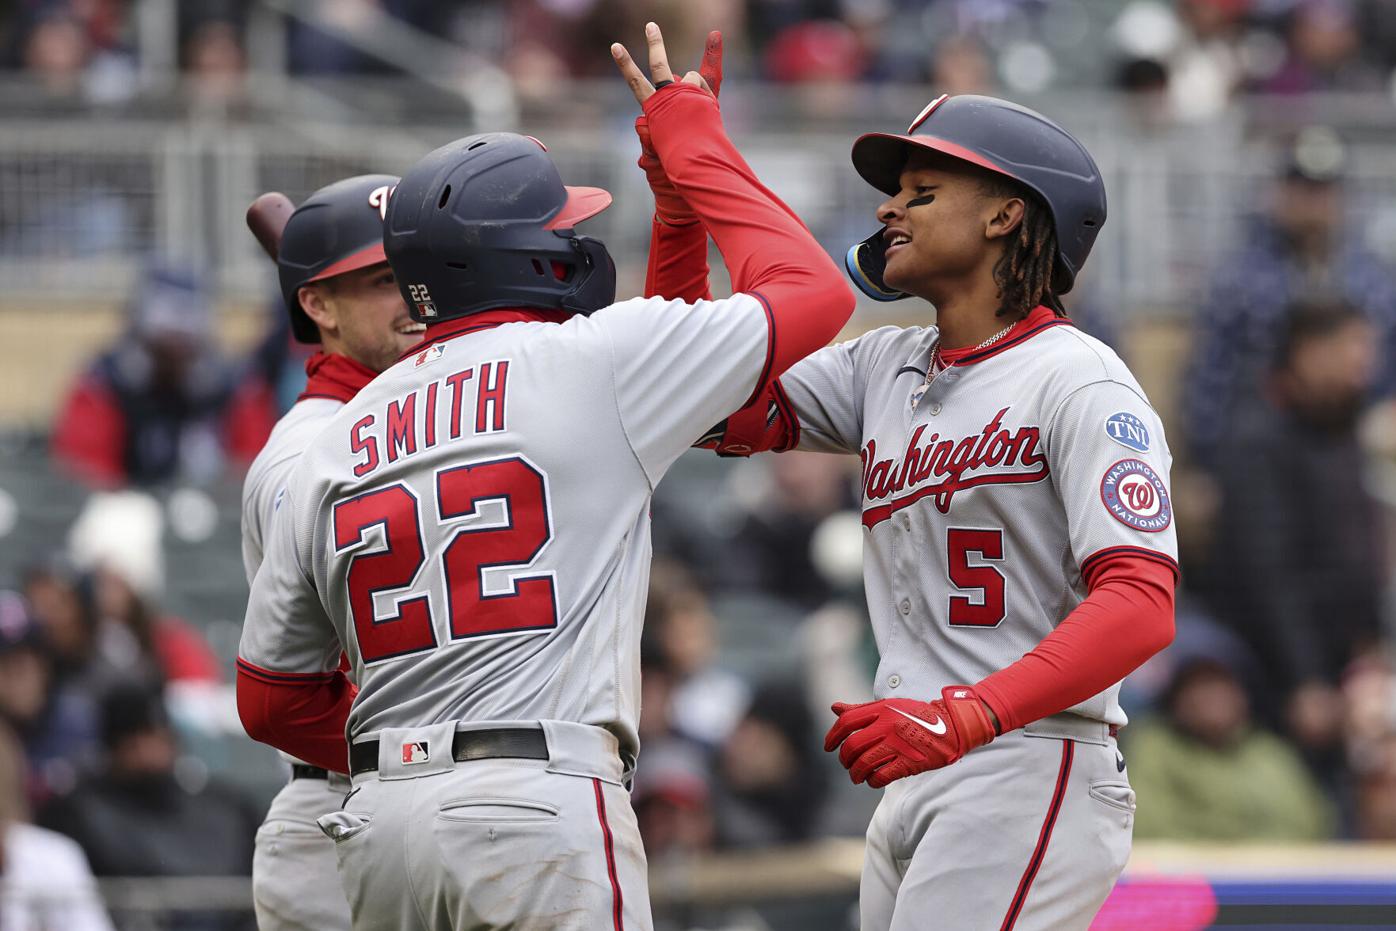 Nats handle chill, defeat Twins again, Sports